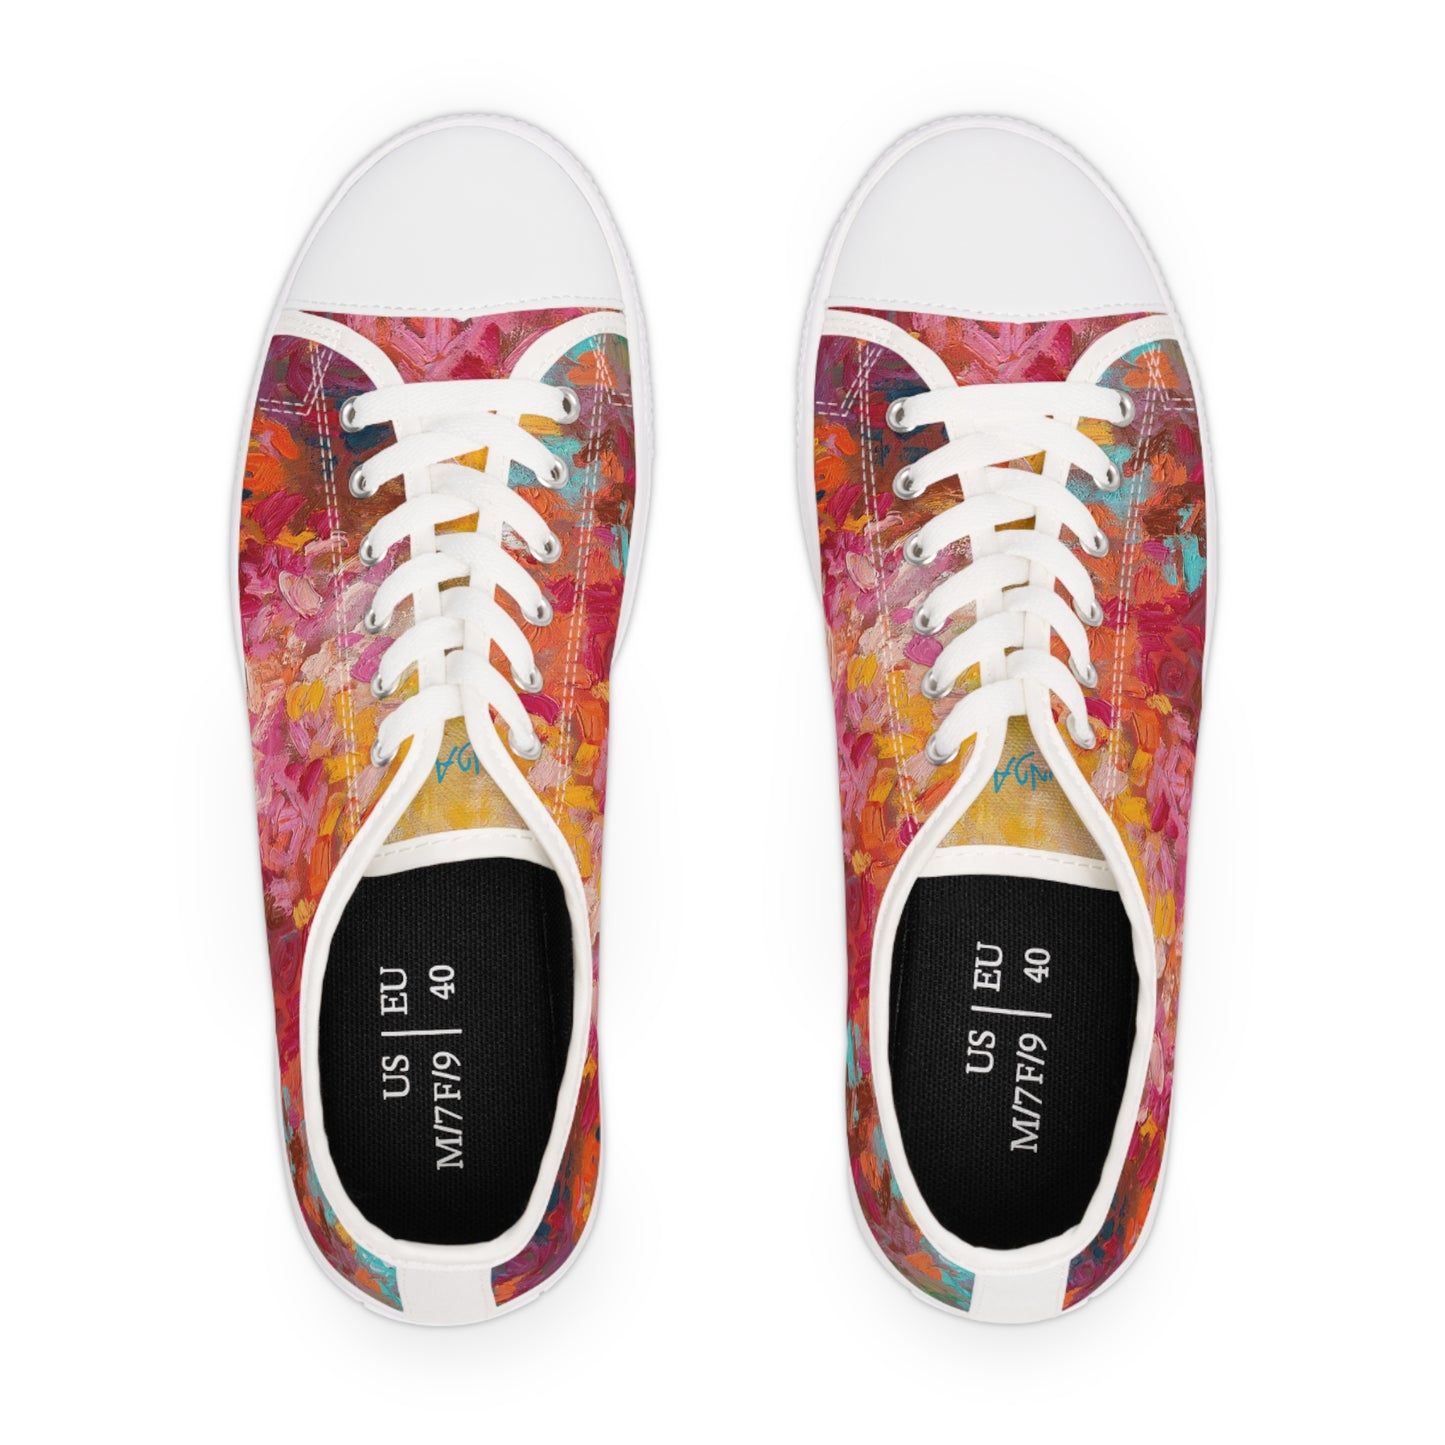 For The Love Of Life Women's Low Top Sneakers